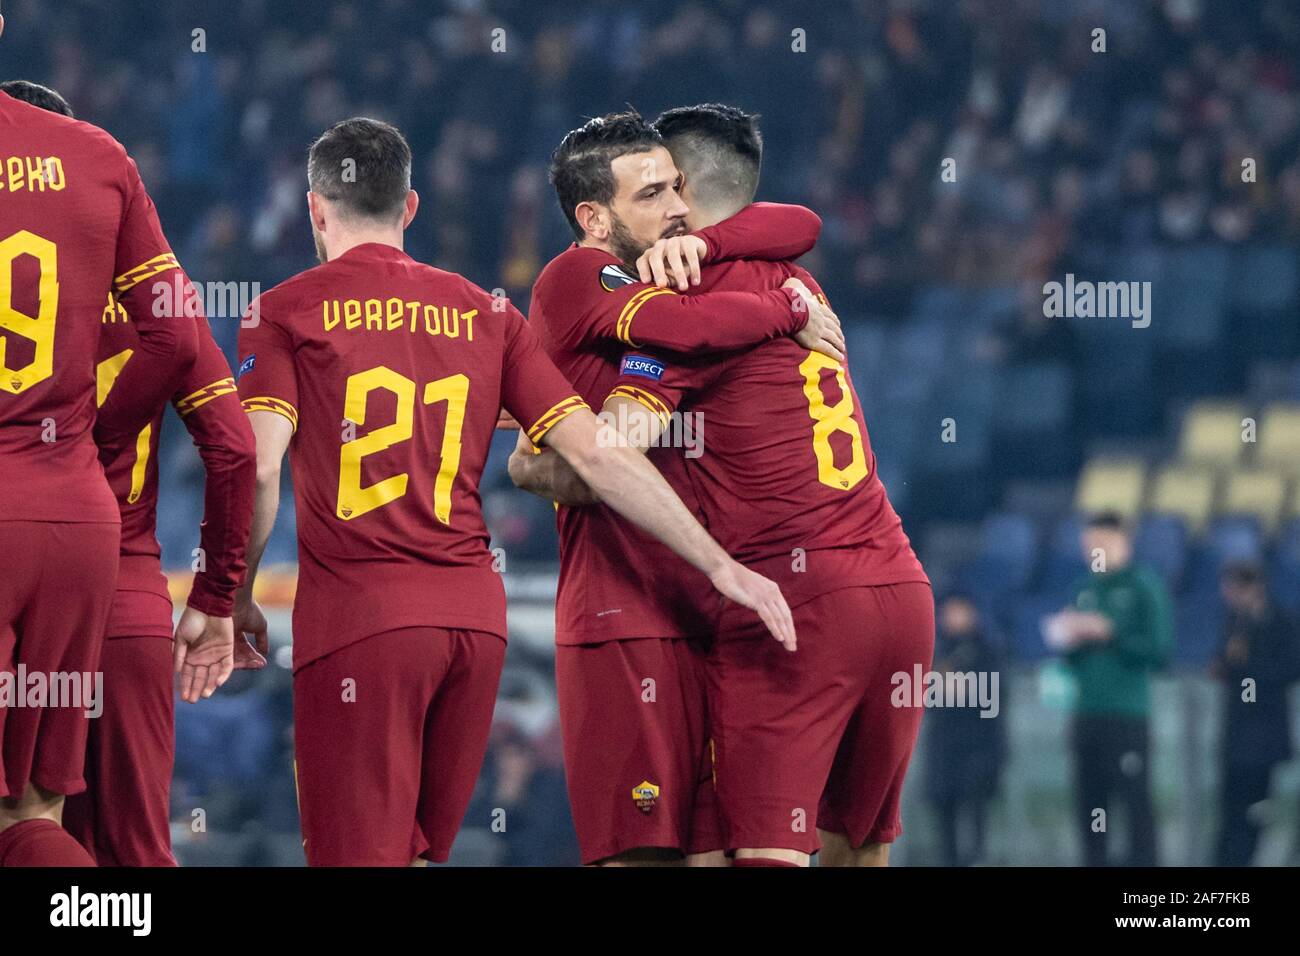 Good luck Symphony Pour AS Roma players celebrate after scoring a goal during the UEFA Europa  League Group J football match between AS Roma and Wolfsberger AC at the  Stadio Olimpico Staduim.Final score; AS Roma 2:2